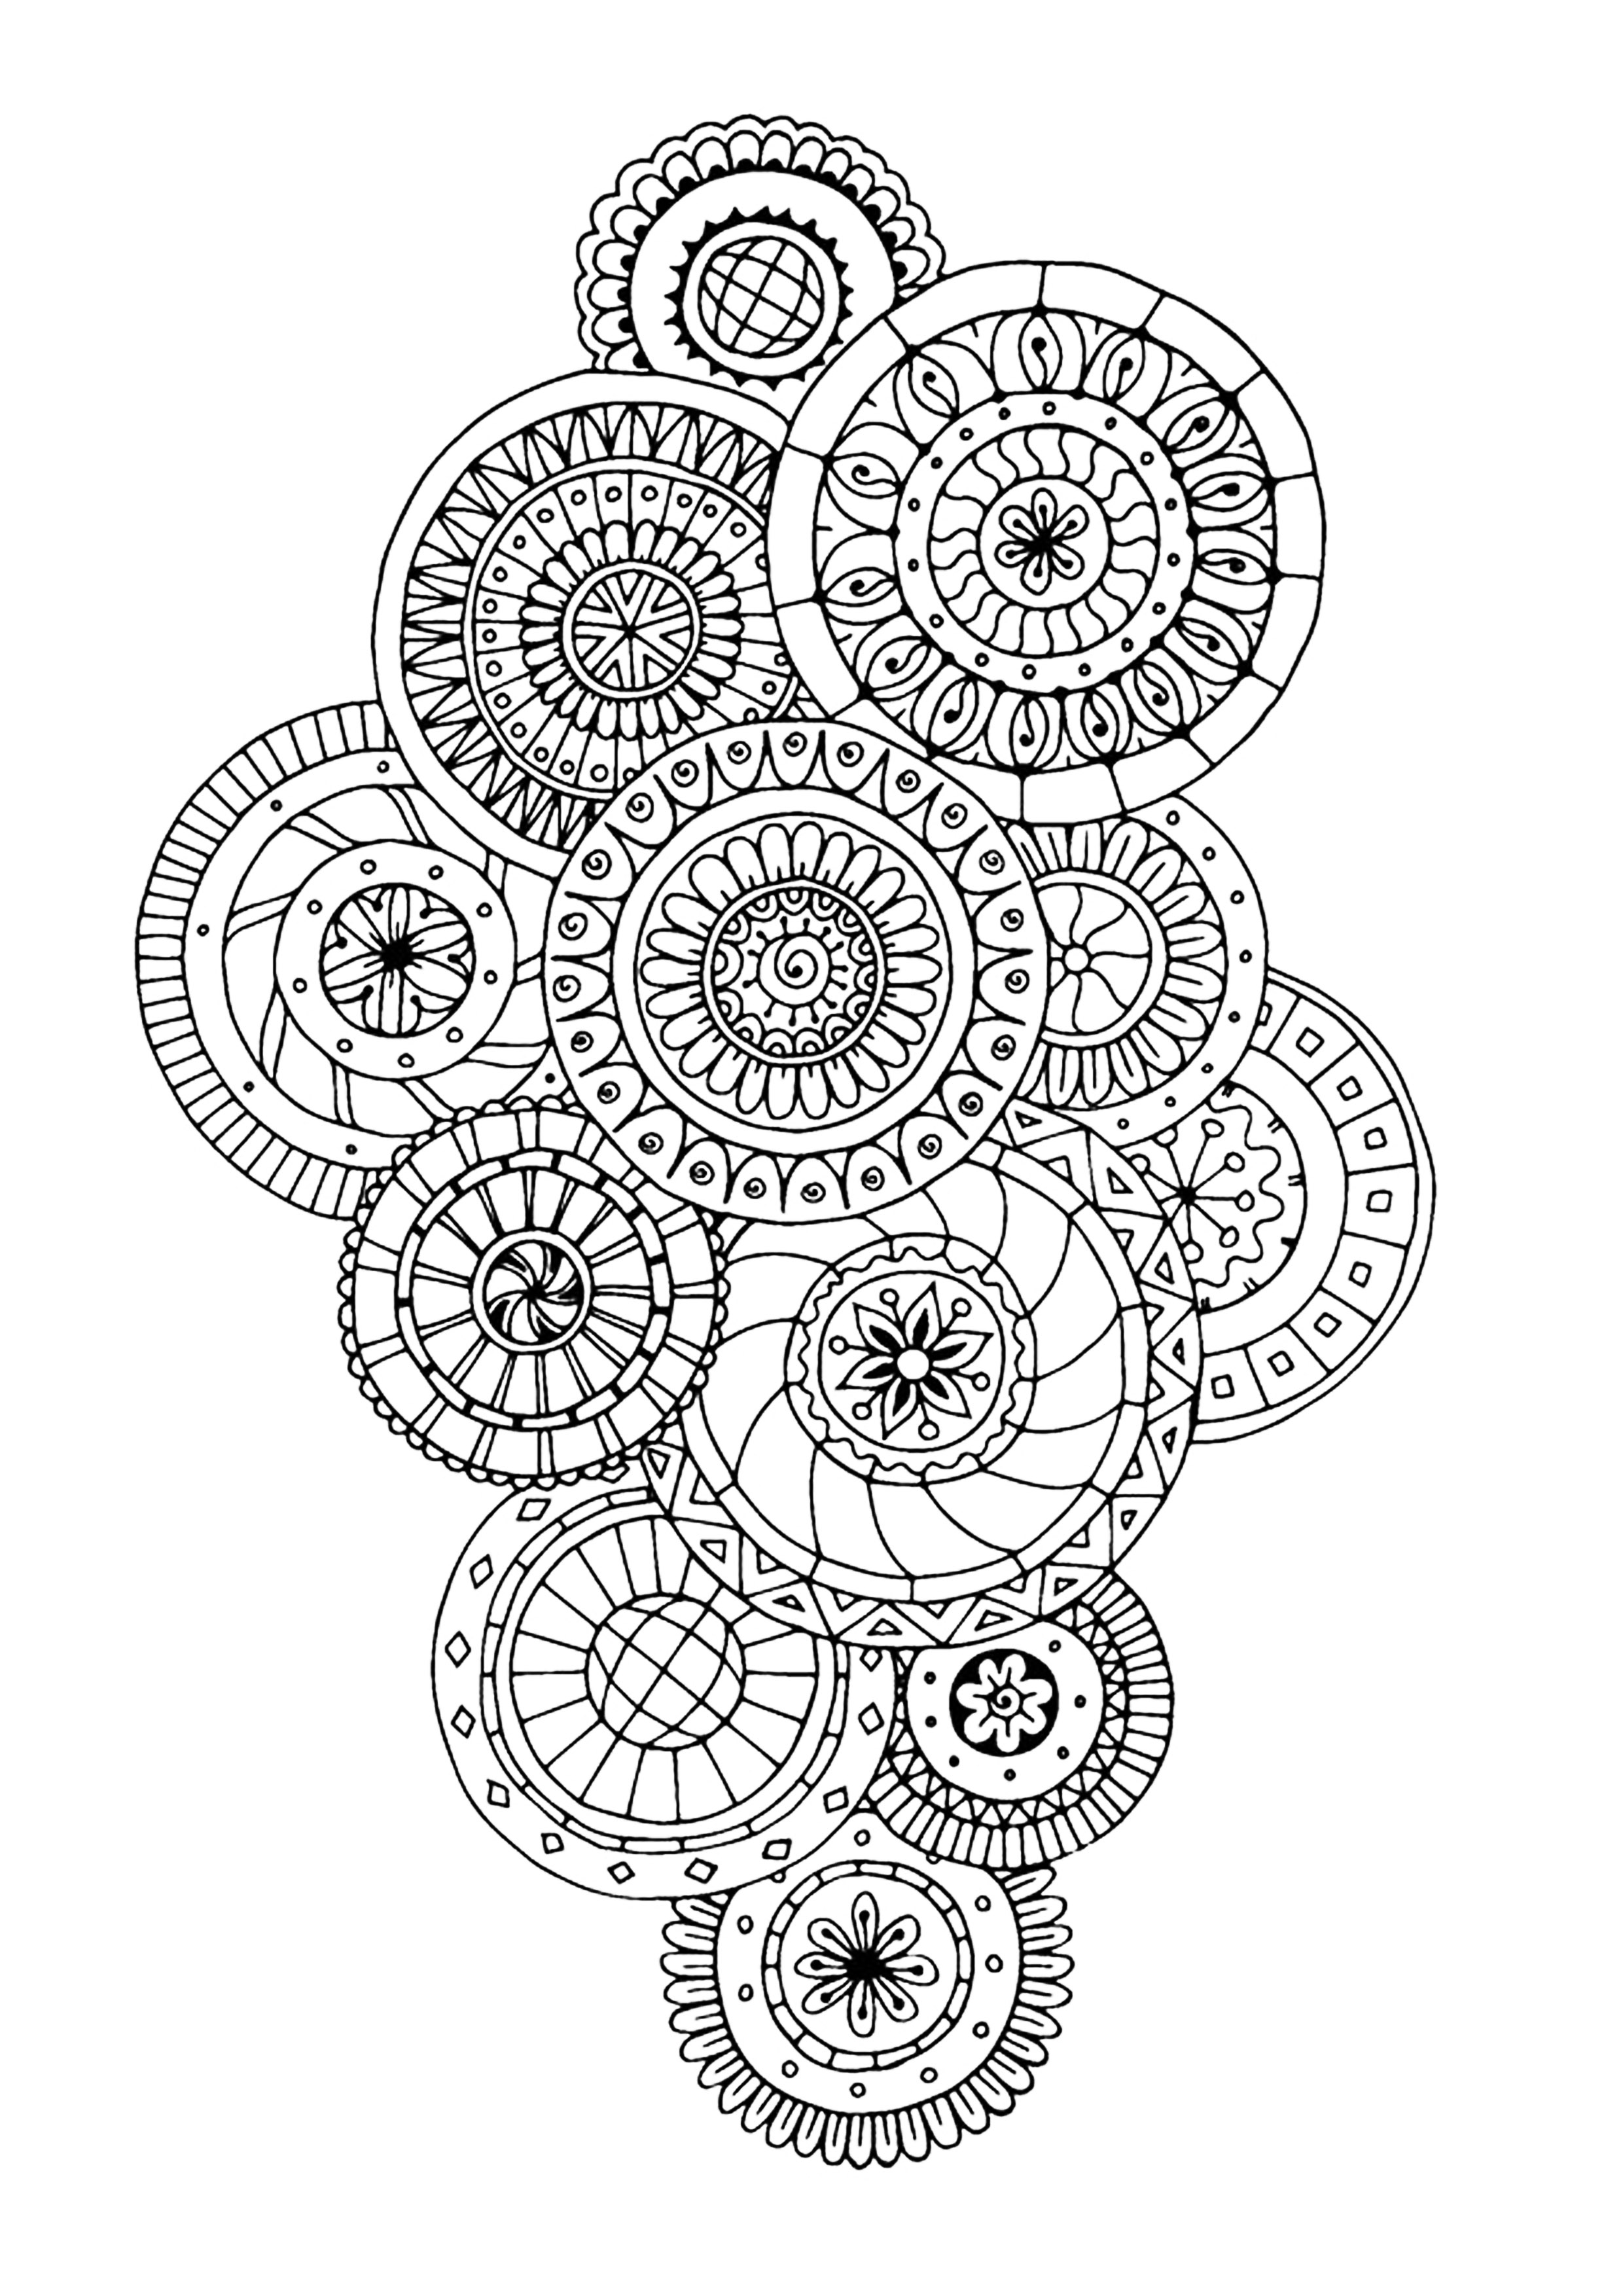 Zen antistress abstract pattern inspired - Anti stress Adult Coloring Pages